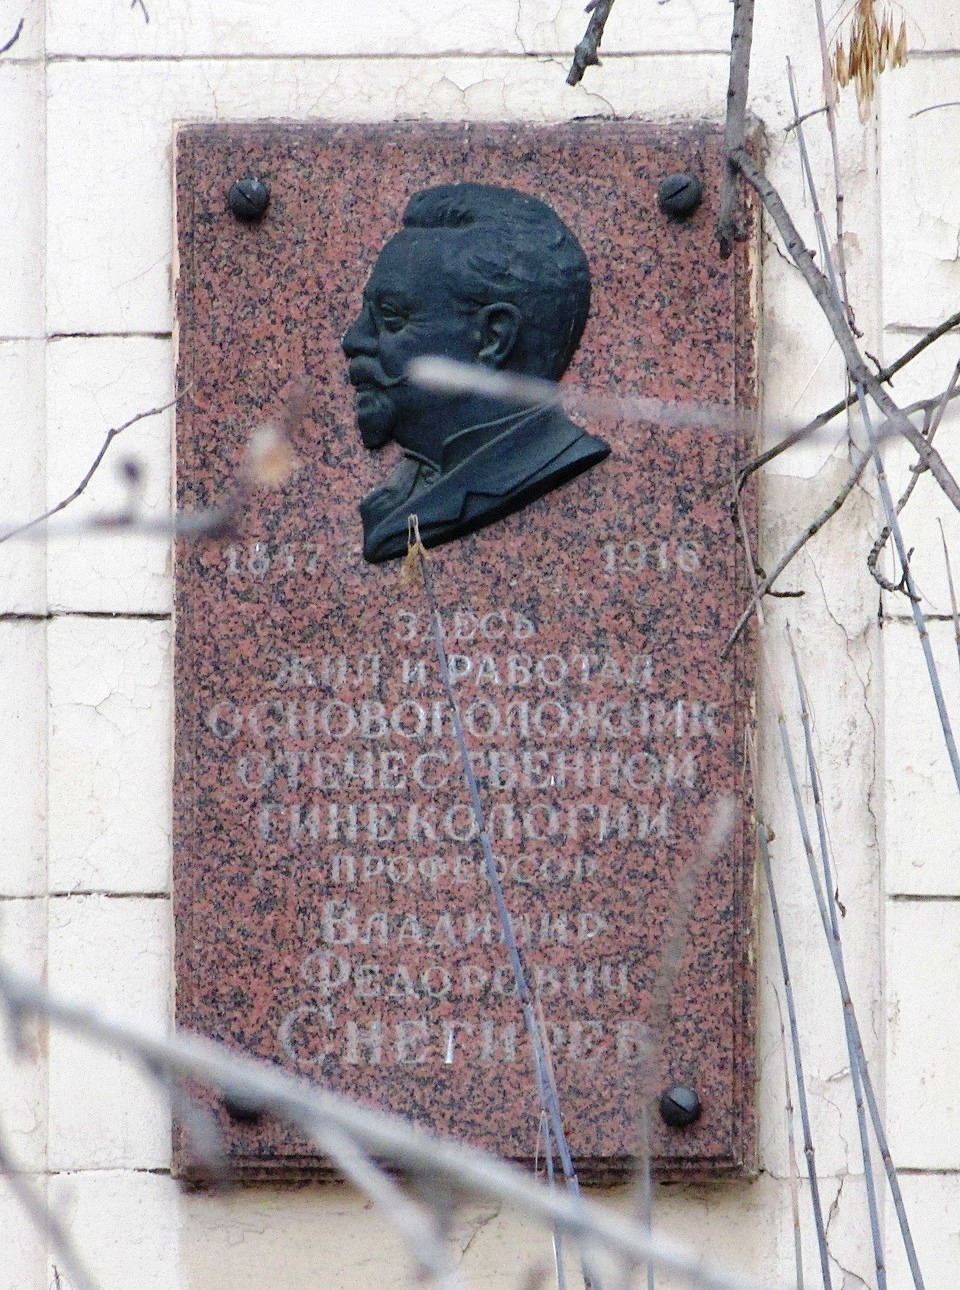 Moscow, Улица Плющиха, 62 стр. 2. Moscow — Memorial plaques